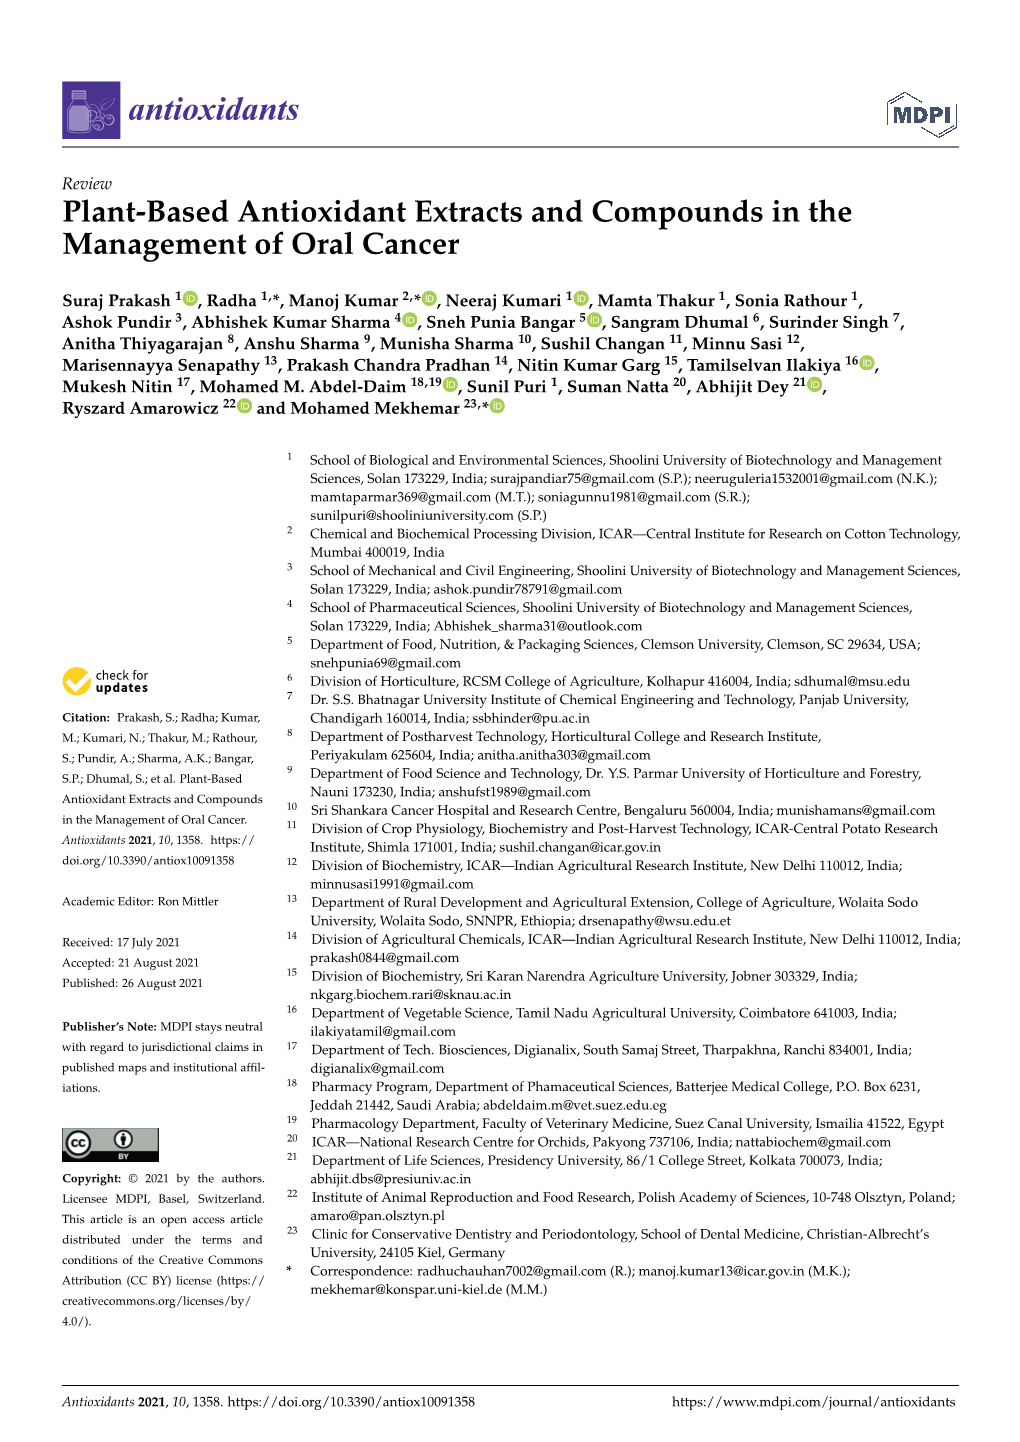 Plant-Based Antioxidant Extracts and Compounds in the Management of Oral Cancer